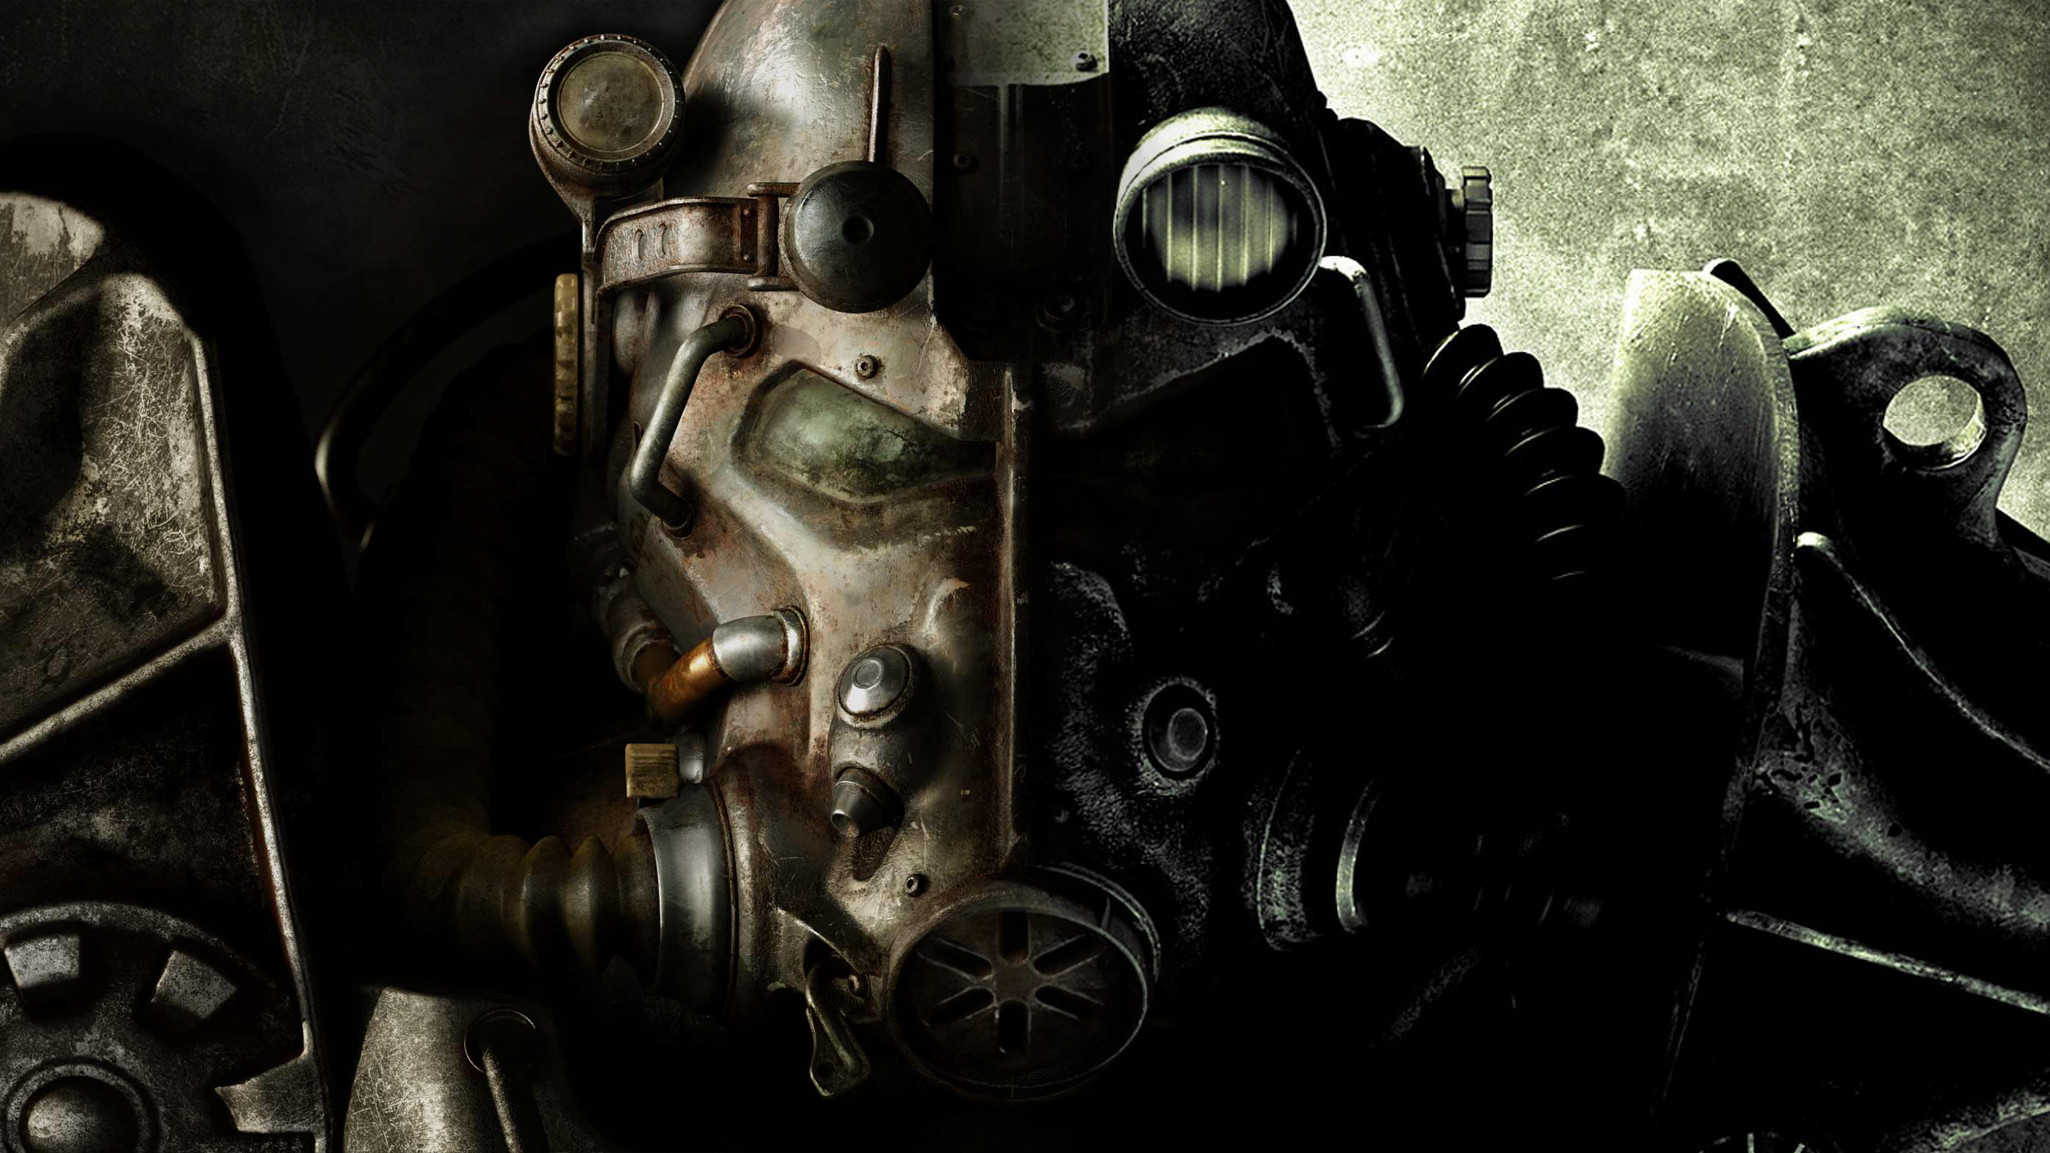 2050x1153 Fallout 4 / 3 Mashup (Redo / Not from trailer) by .